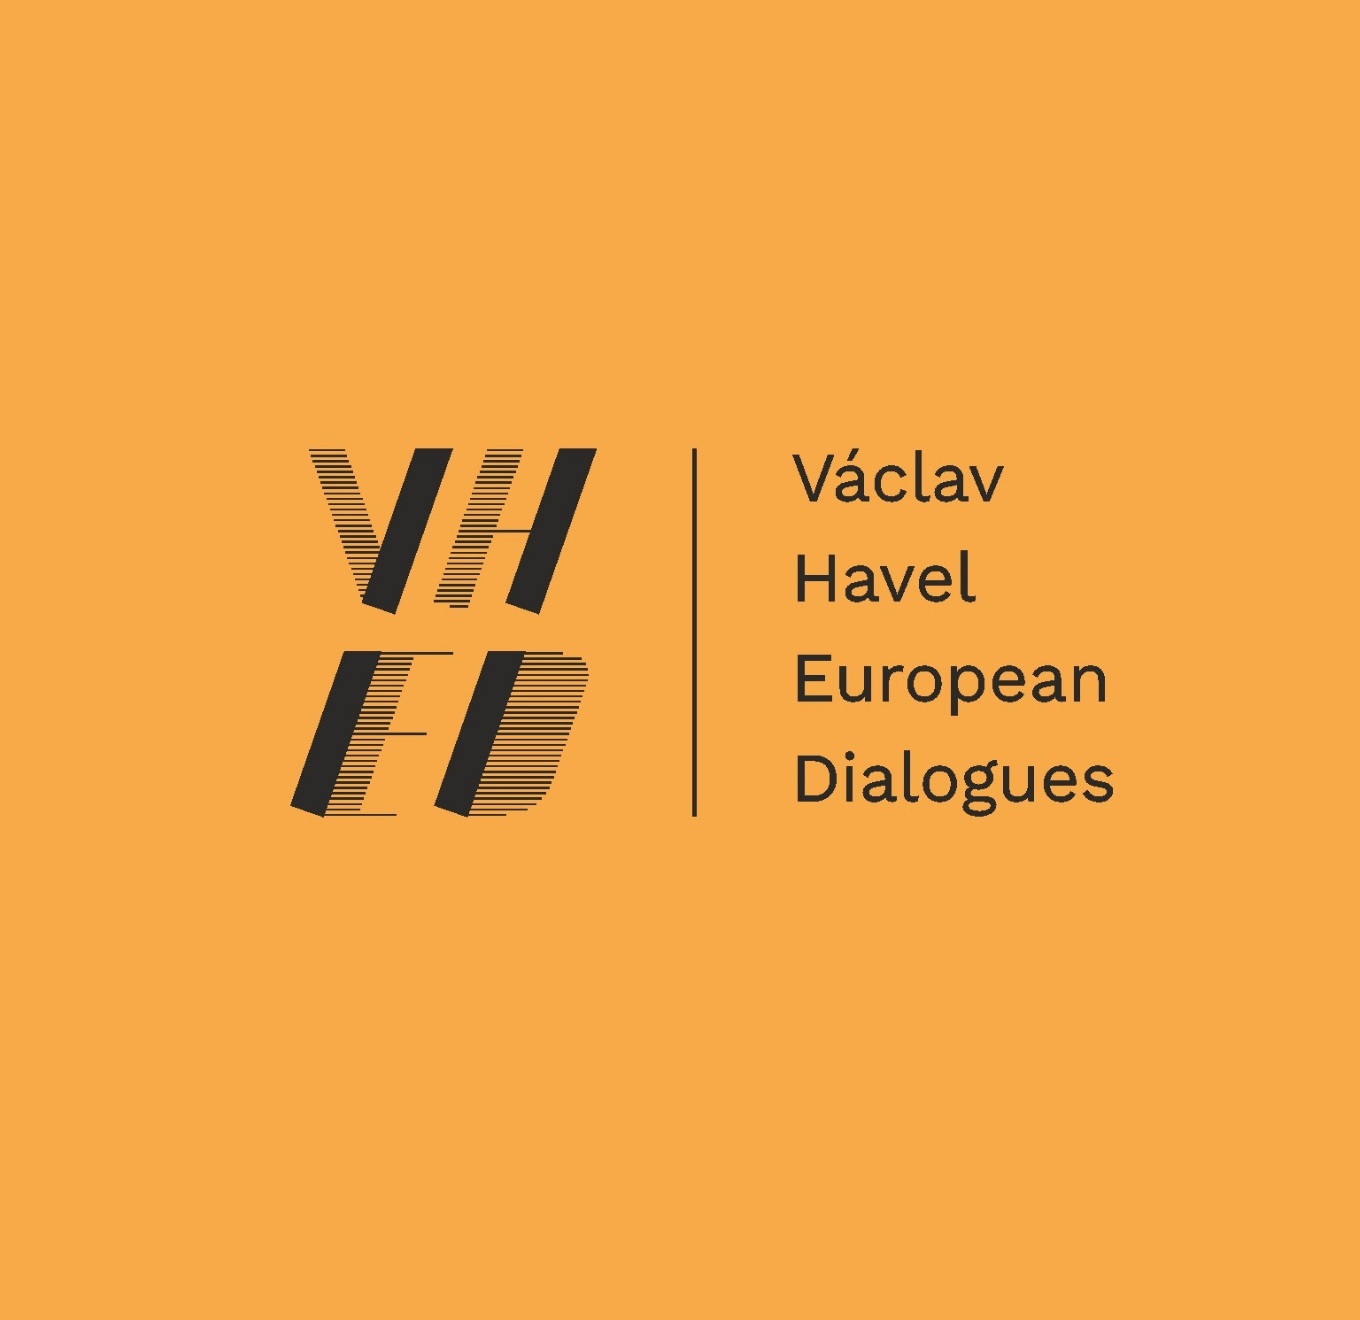 Václav Havel European Dialogues: Is truth a thing of the past?, Plzeň